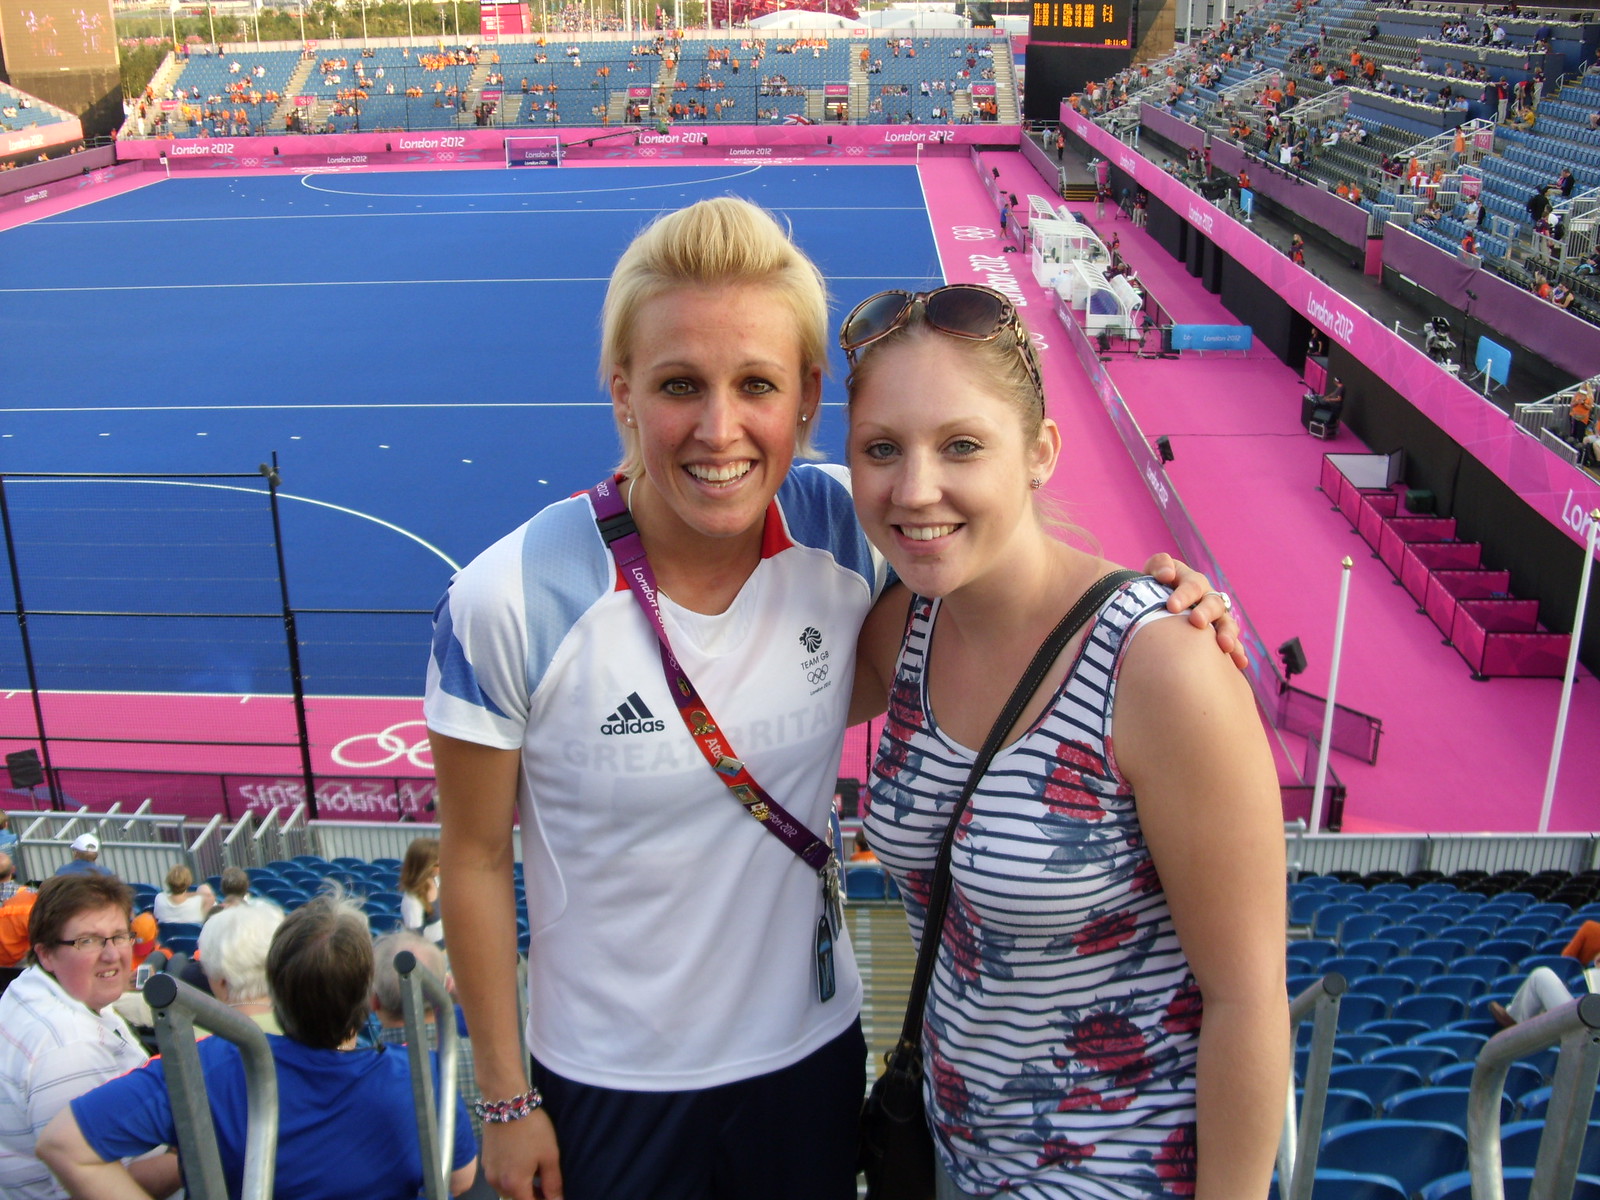 Whilst Emily and Olivia were at the womens' hockey final waiting for the match to begin they spotted Alex Danson in the stand next to them! So they ran over and congratulated her on the bronze medal and told her they had been watching every game then had